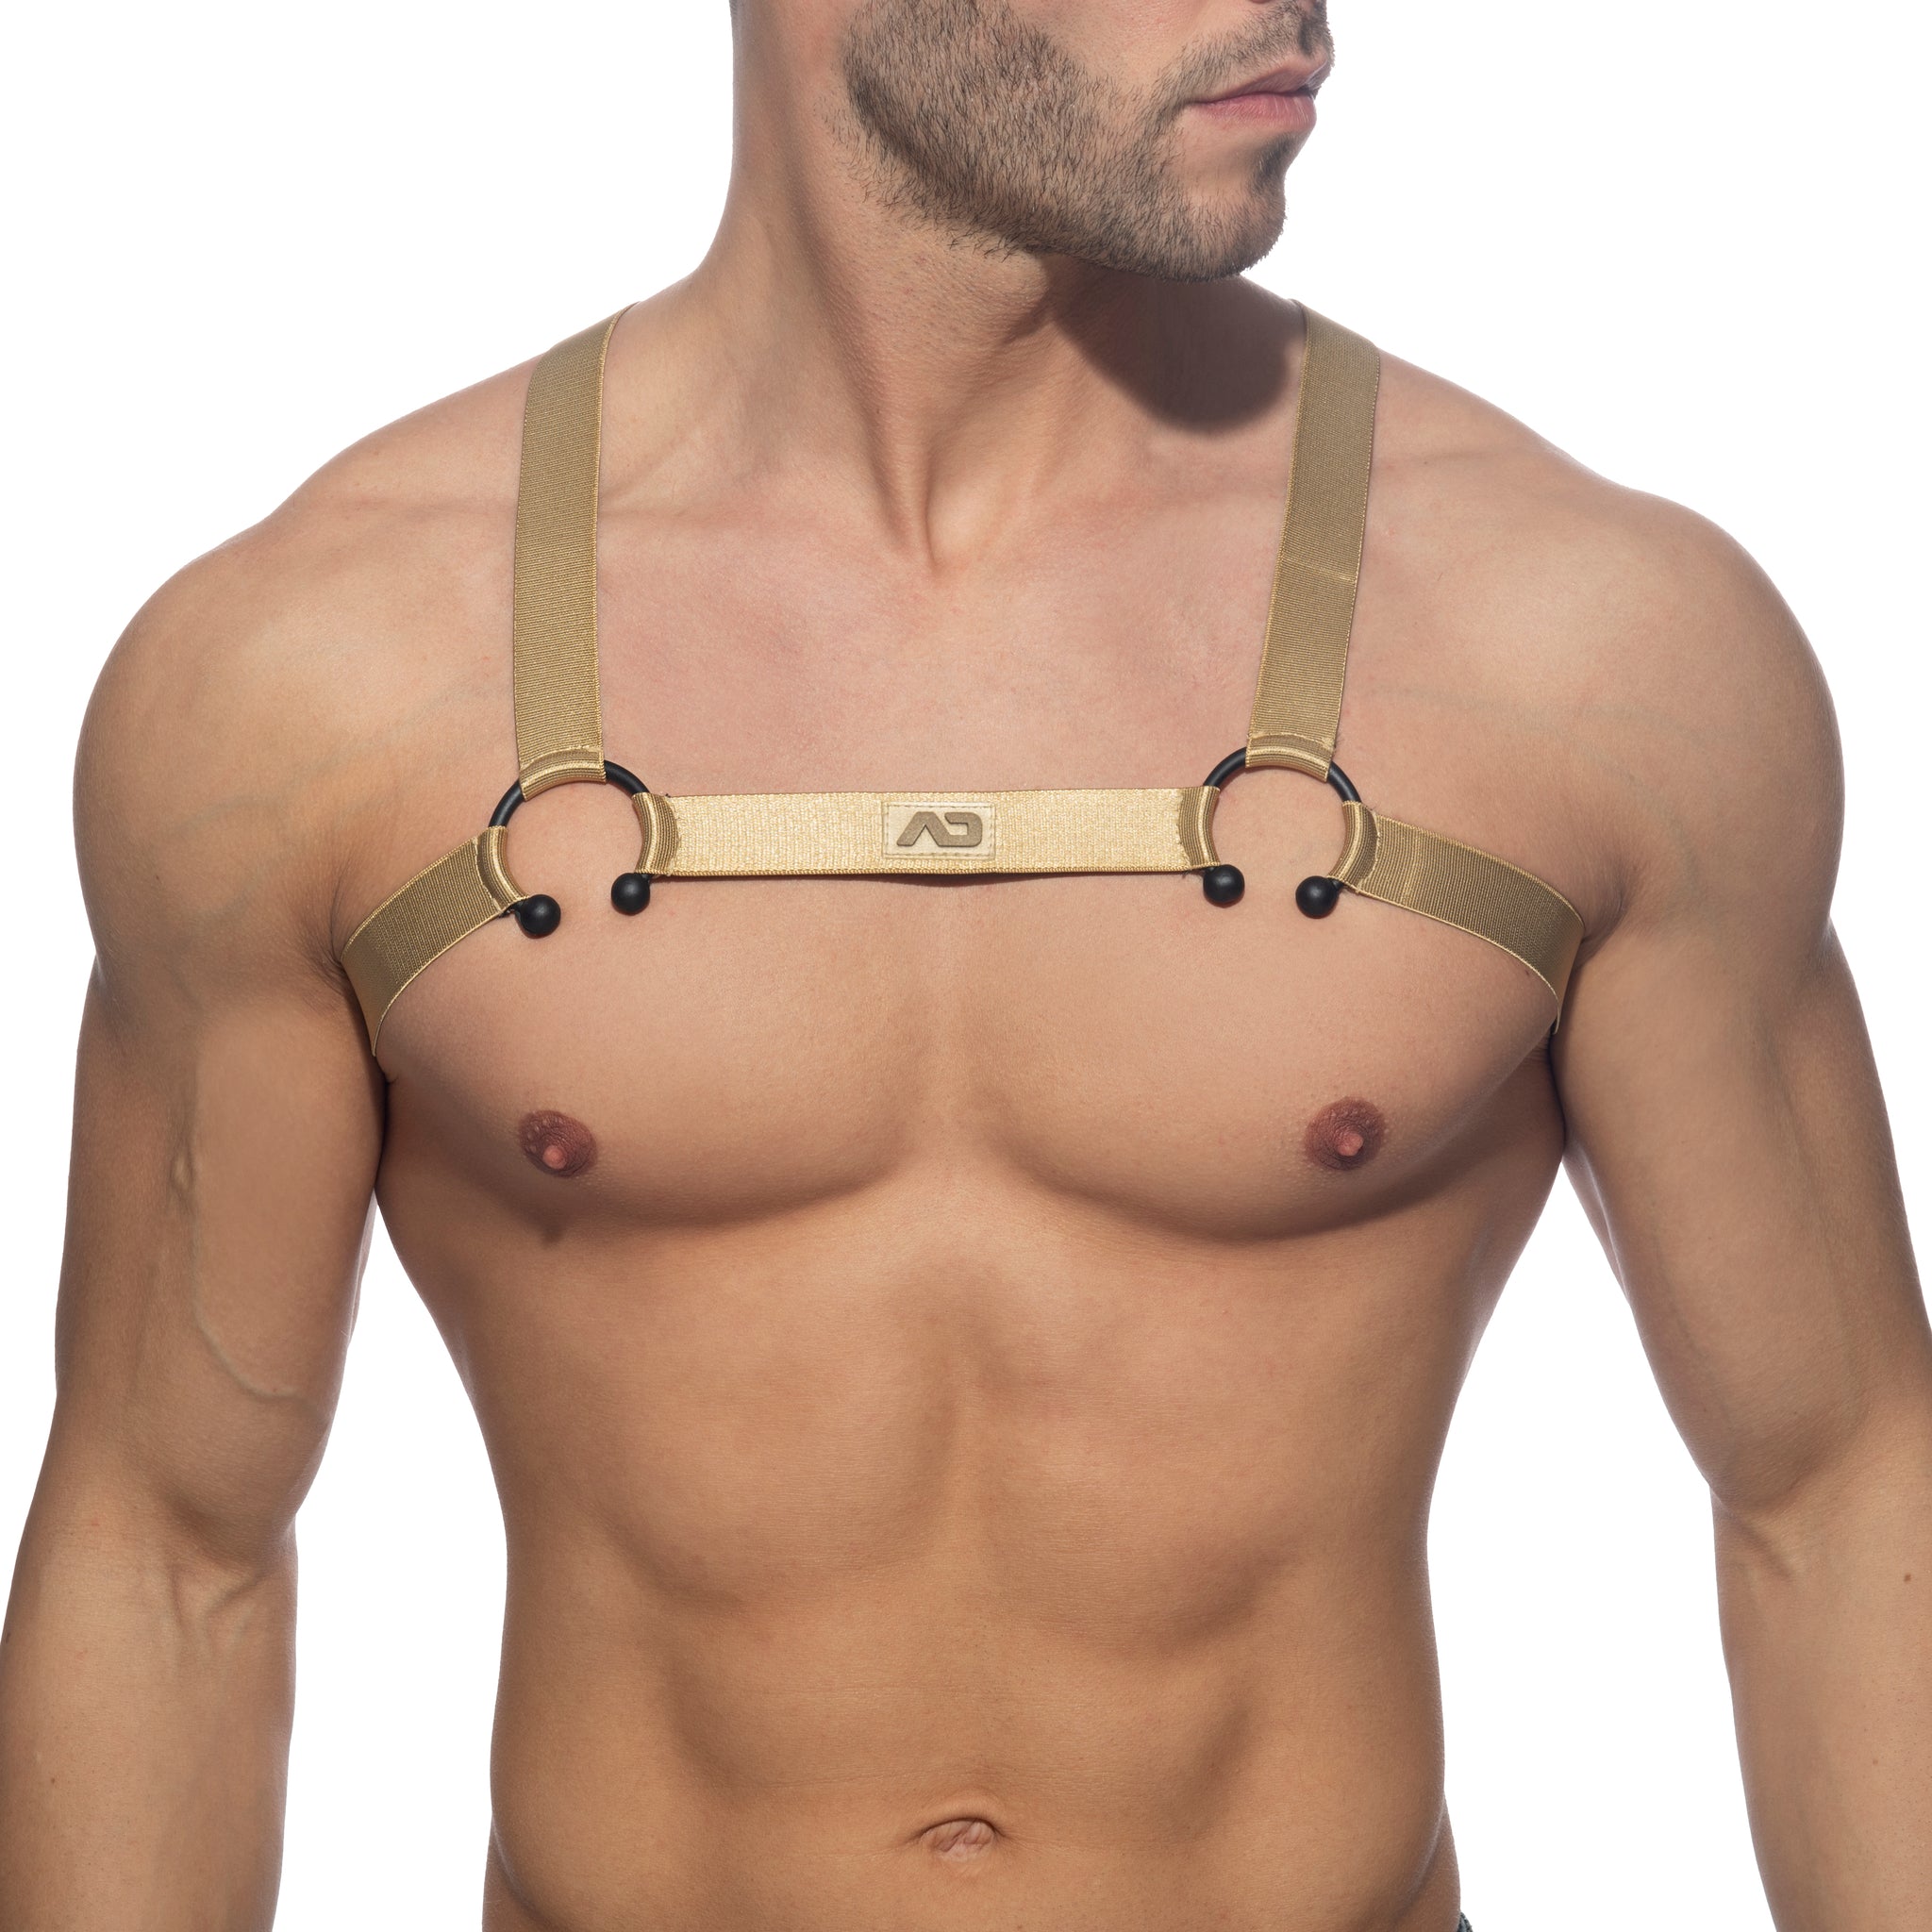 Addicted Bull Ring Harness Gold AD1080